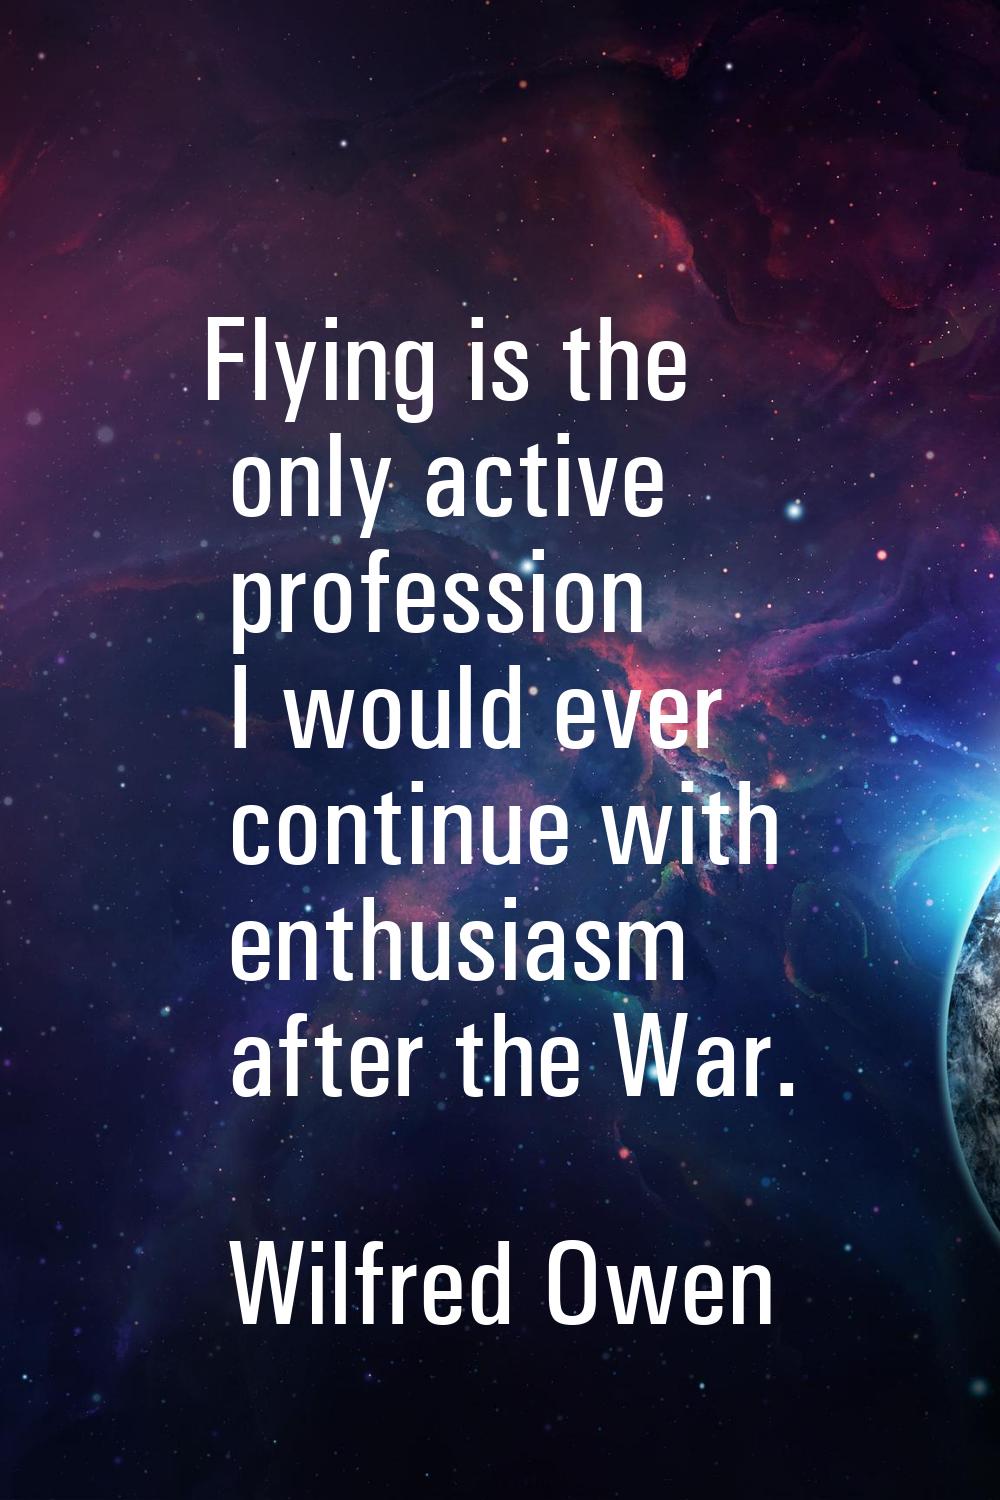 Flying is the only active profession I would ever continue with enthusiasm after the War.